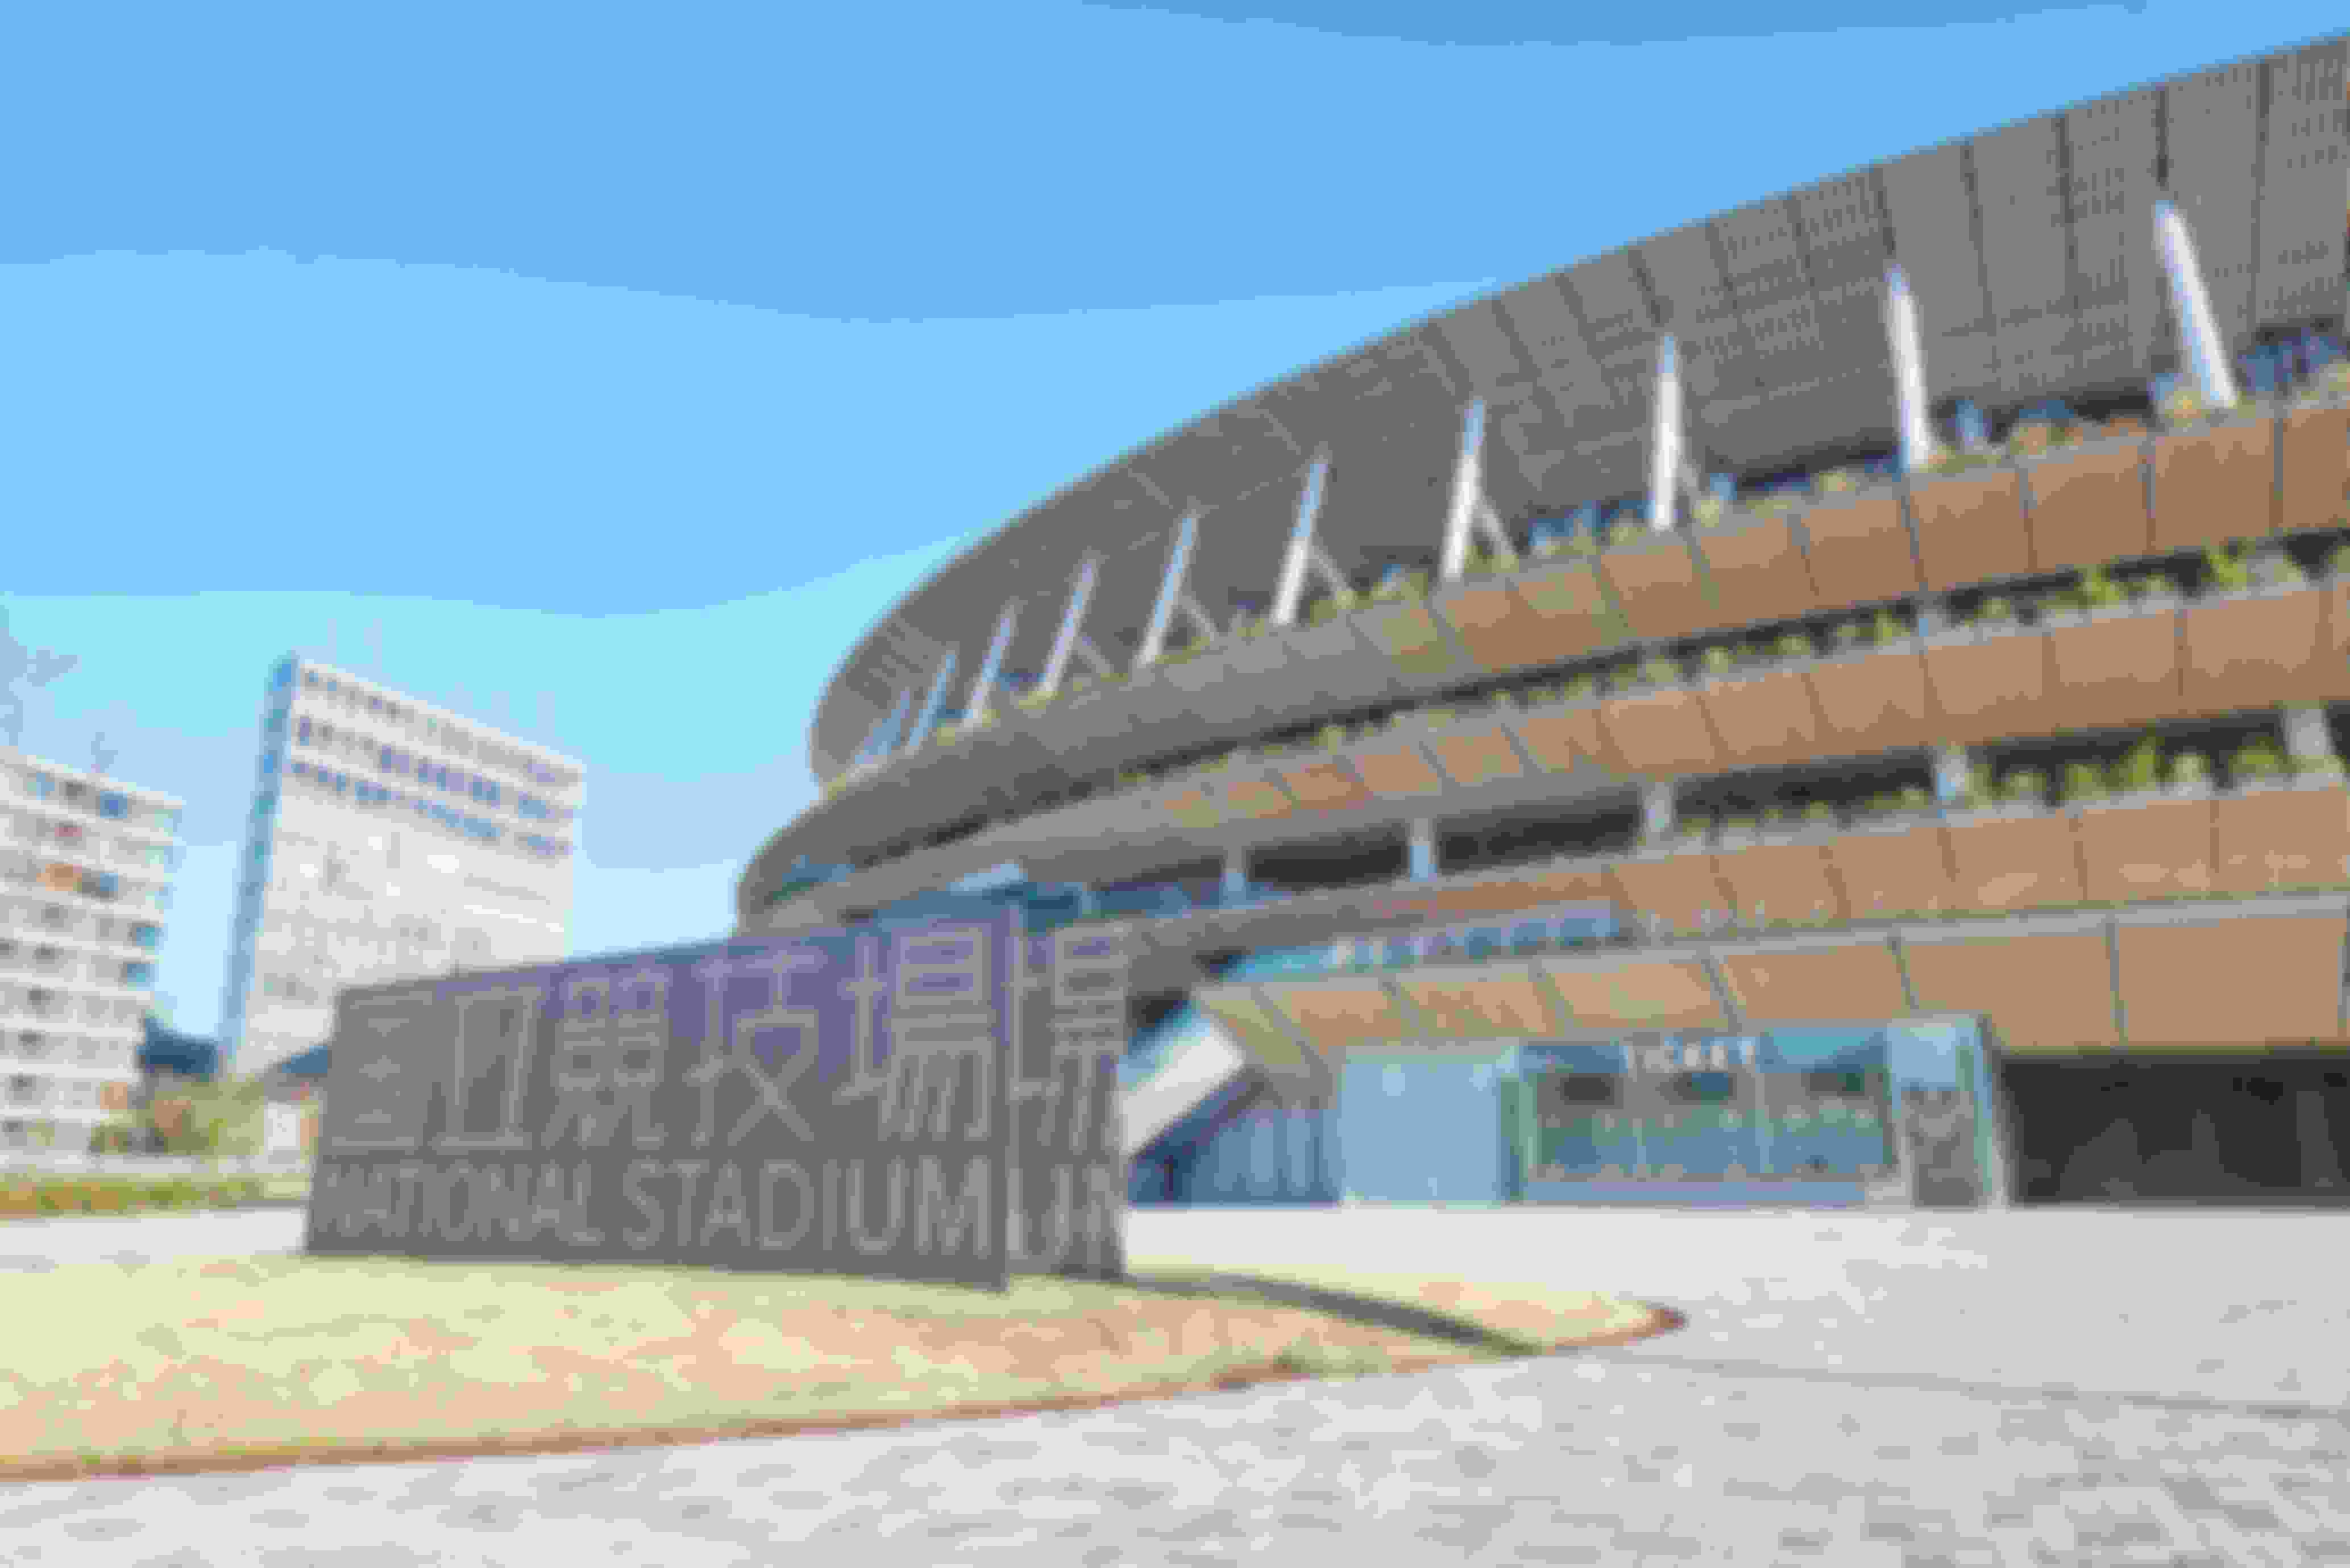 Tokyo's new National Stadium from the outside (©Japan Sport Council)